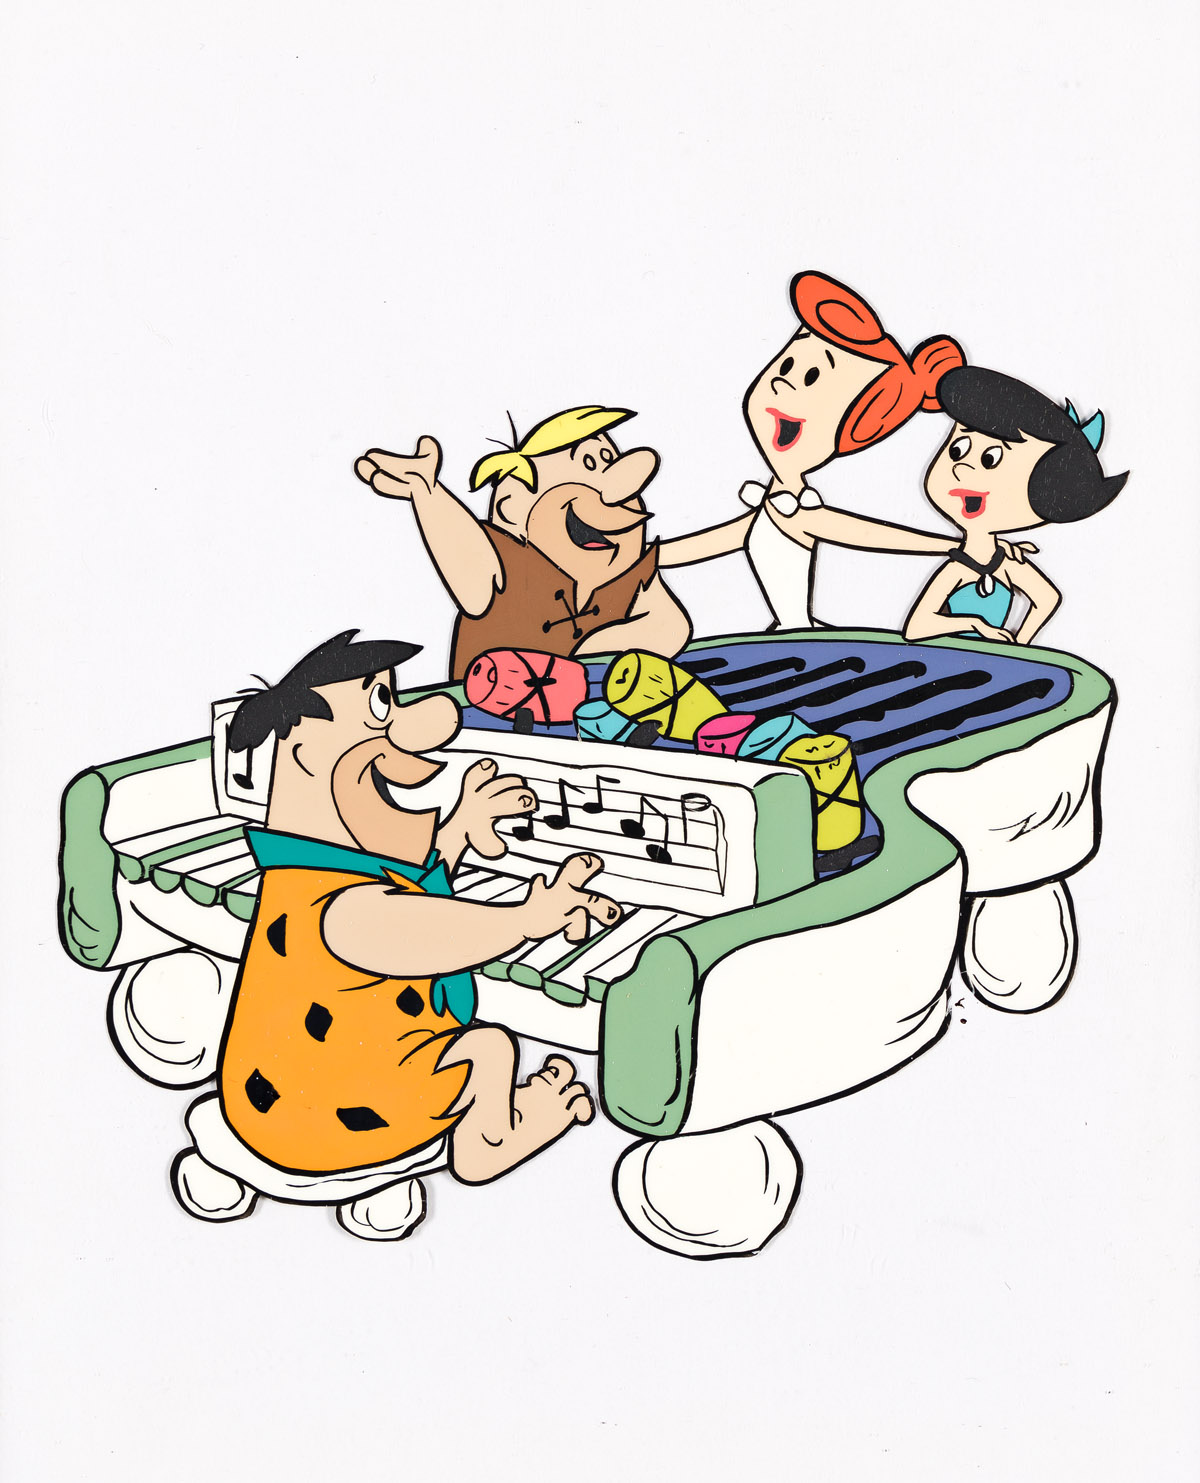 (ANIMATION) HANNA-BARBERA STUDIOS The Flintstones. Hand-inked studio publicity cel featuring Fred, Wilma, Barney, and Betty.